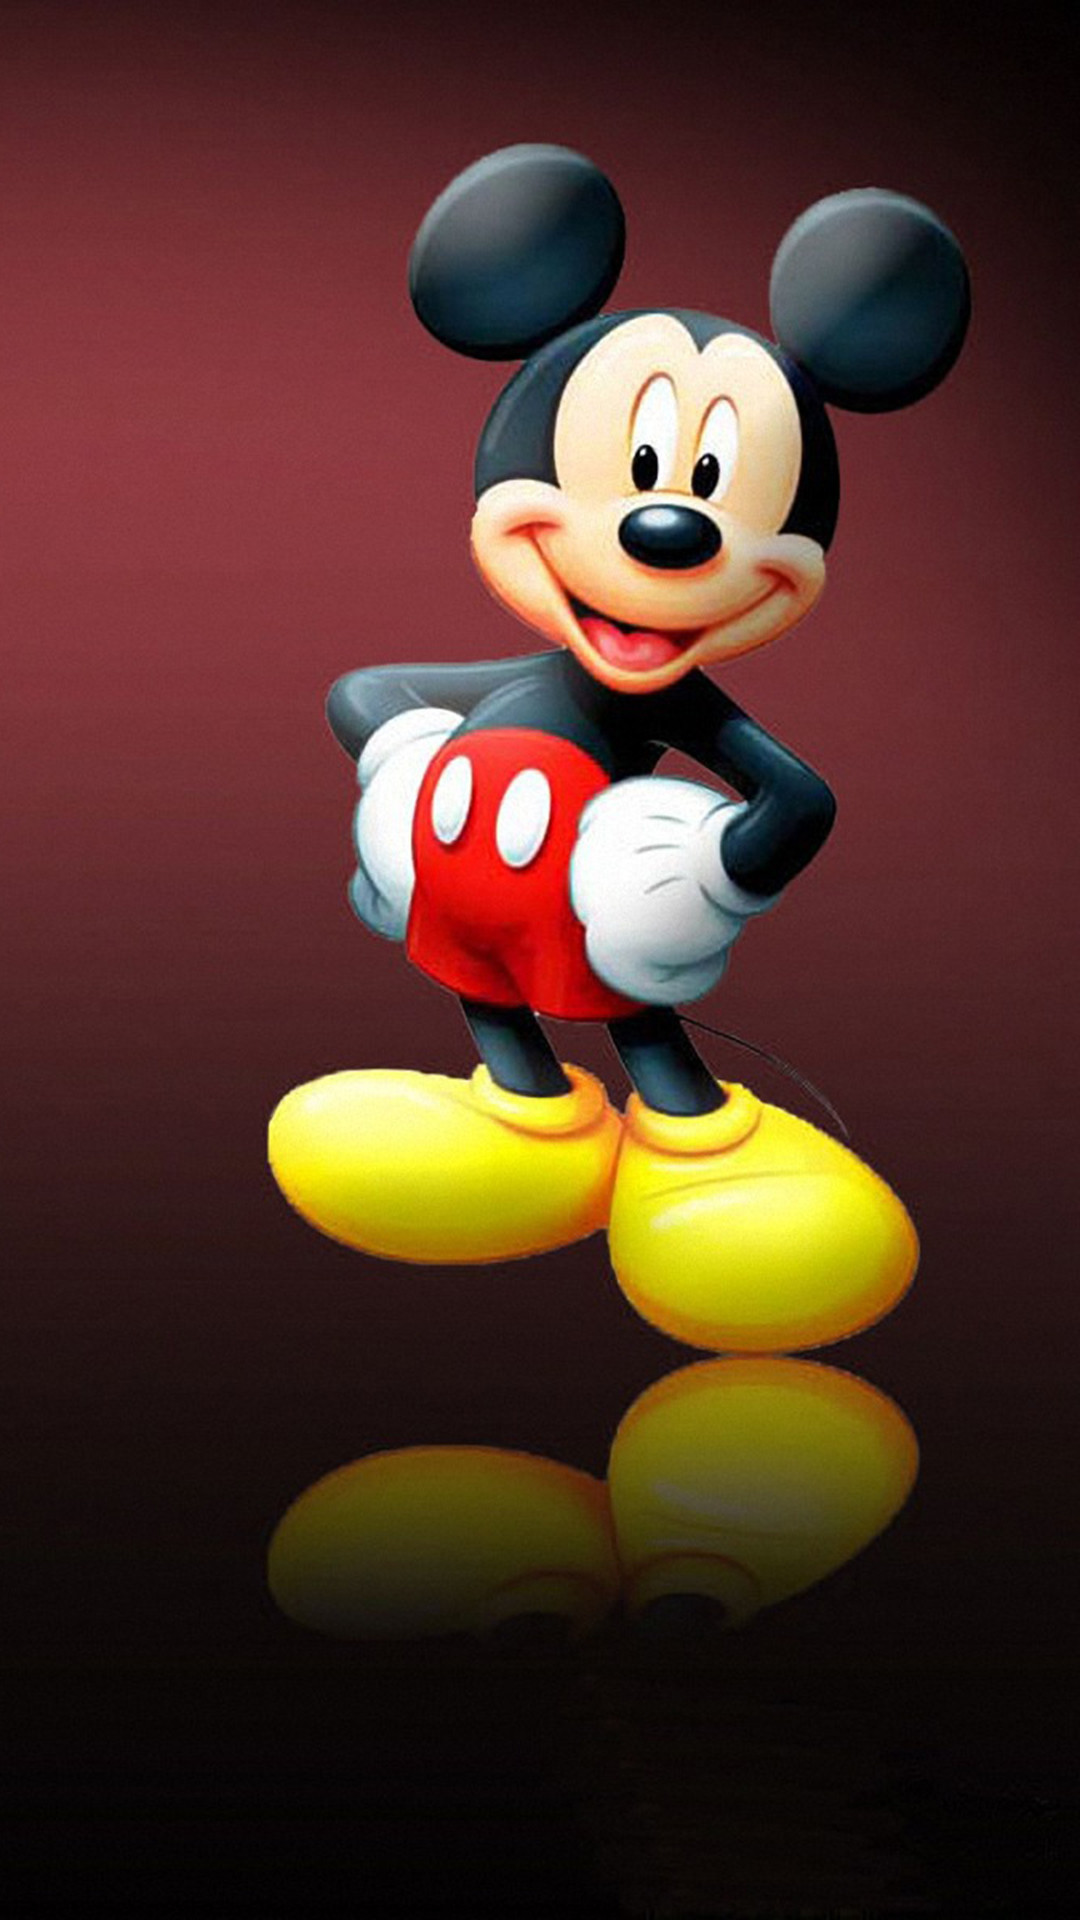 Disney Mickey Mouse Iphone Wallpapers